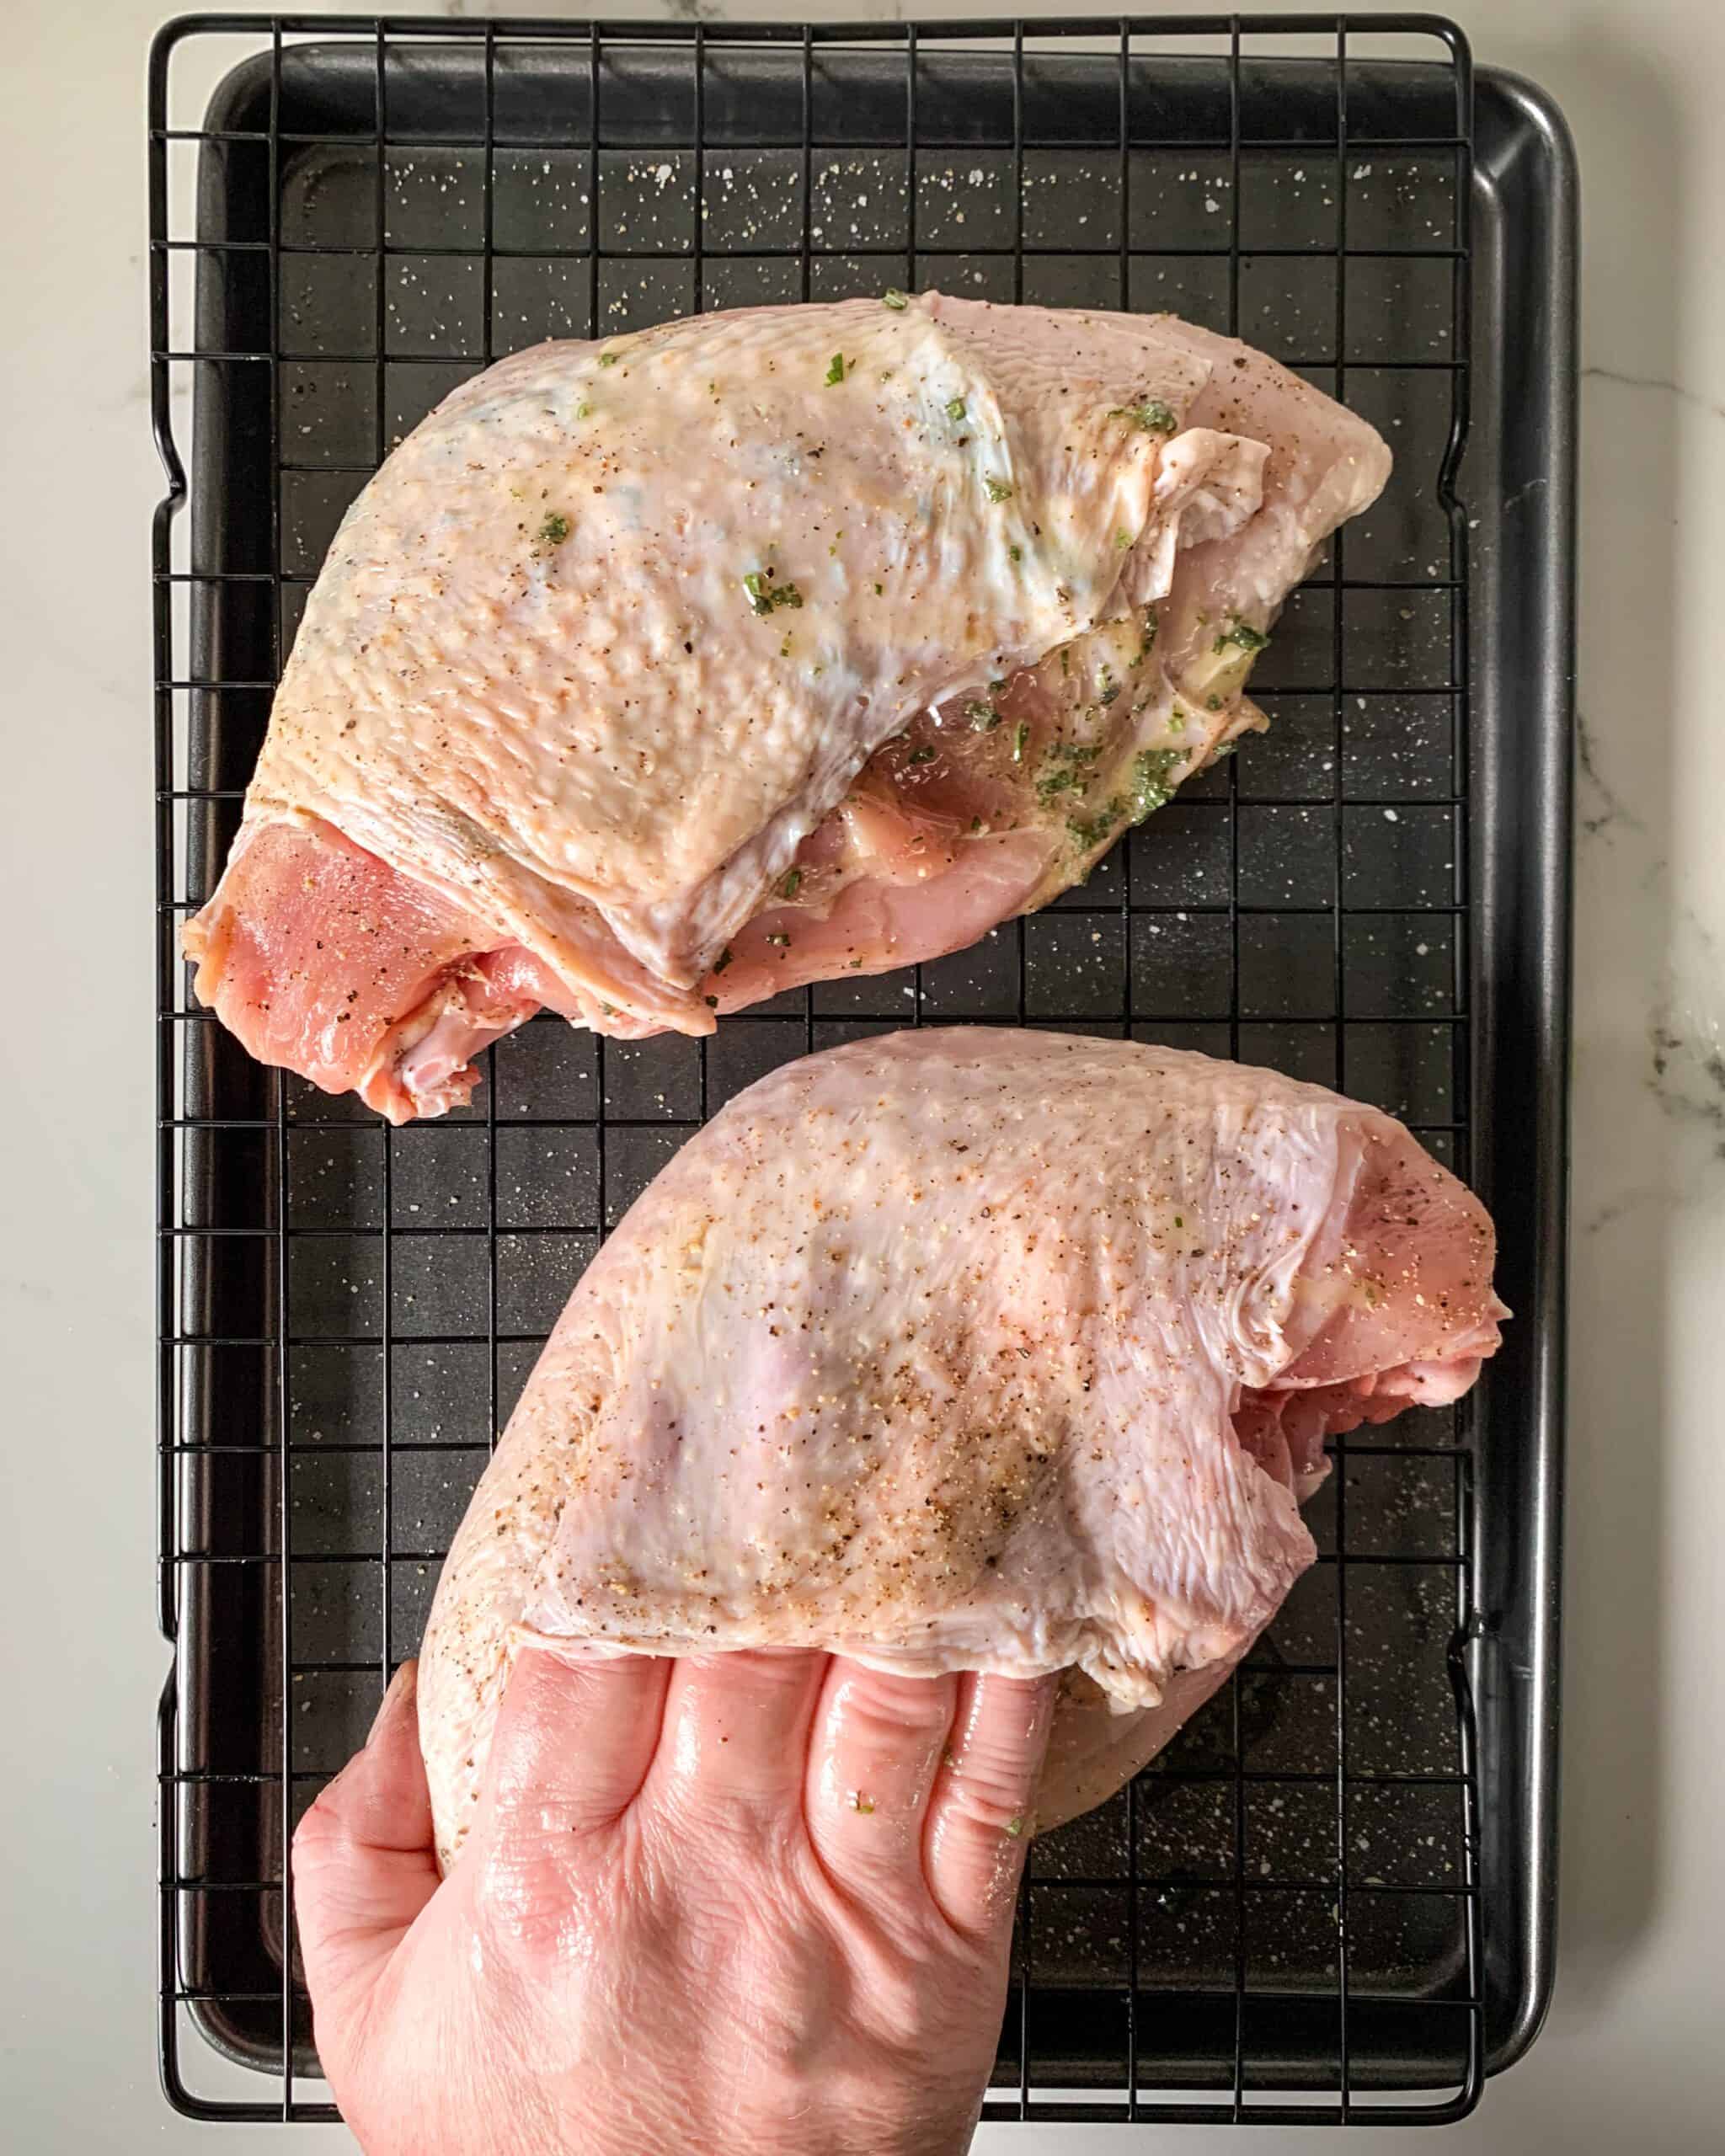 Rubbing the turkey breast with butter under the skin.